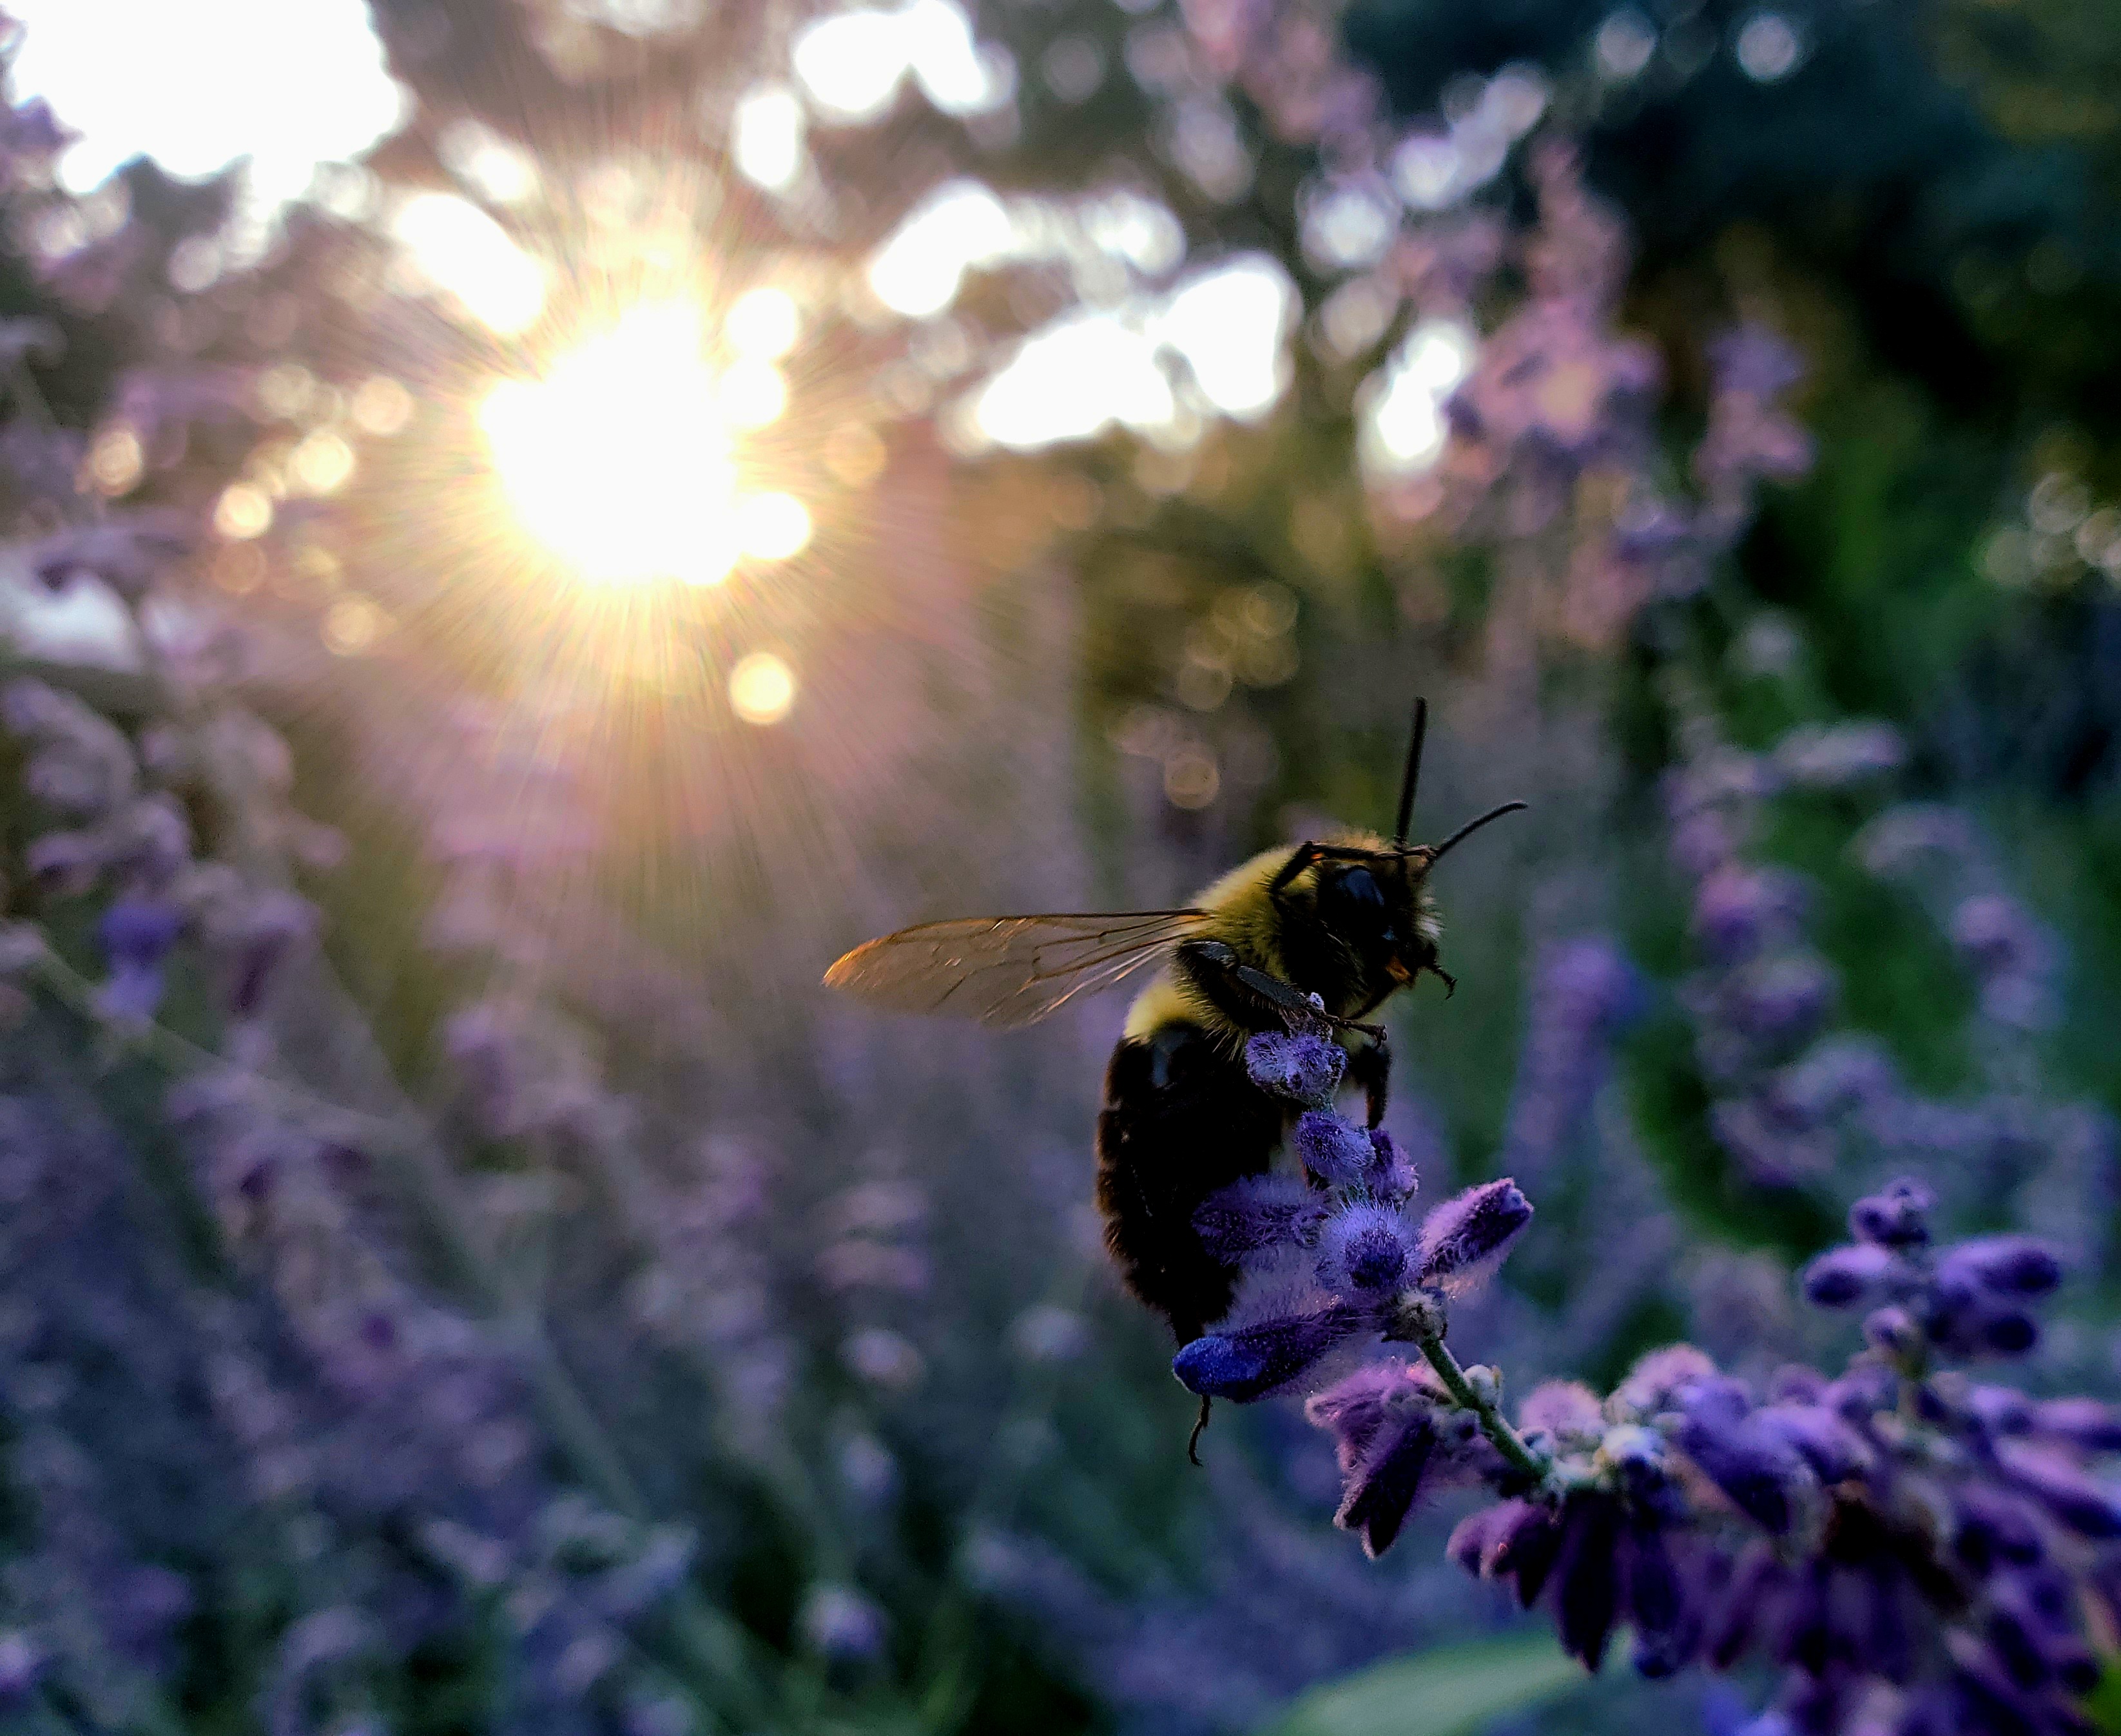 color photograph close-up of bee on purple flower with sun behind it through foliage